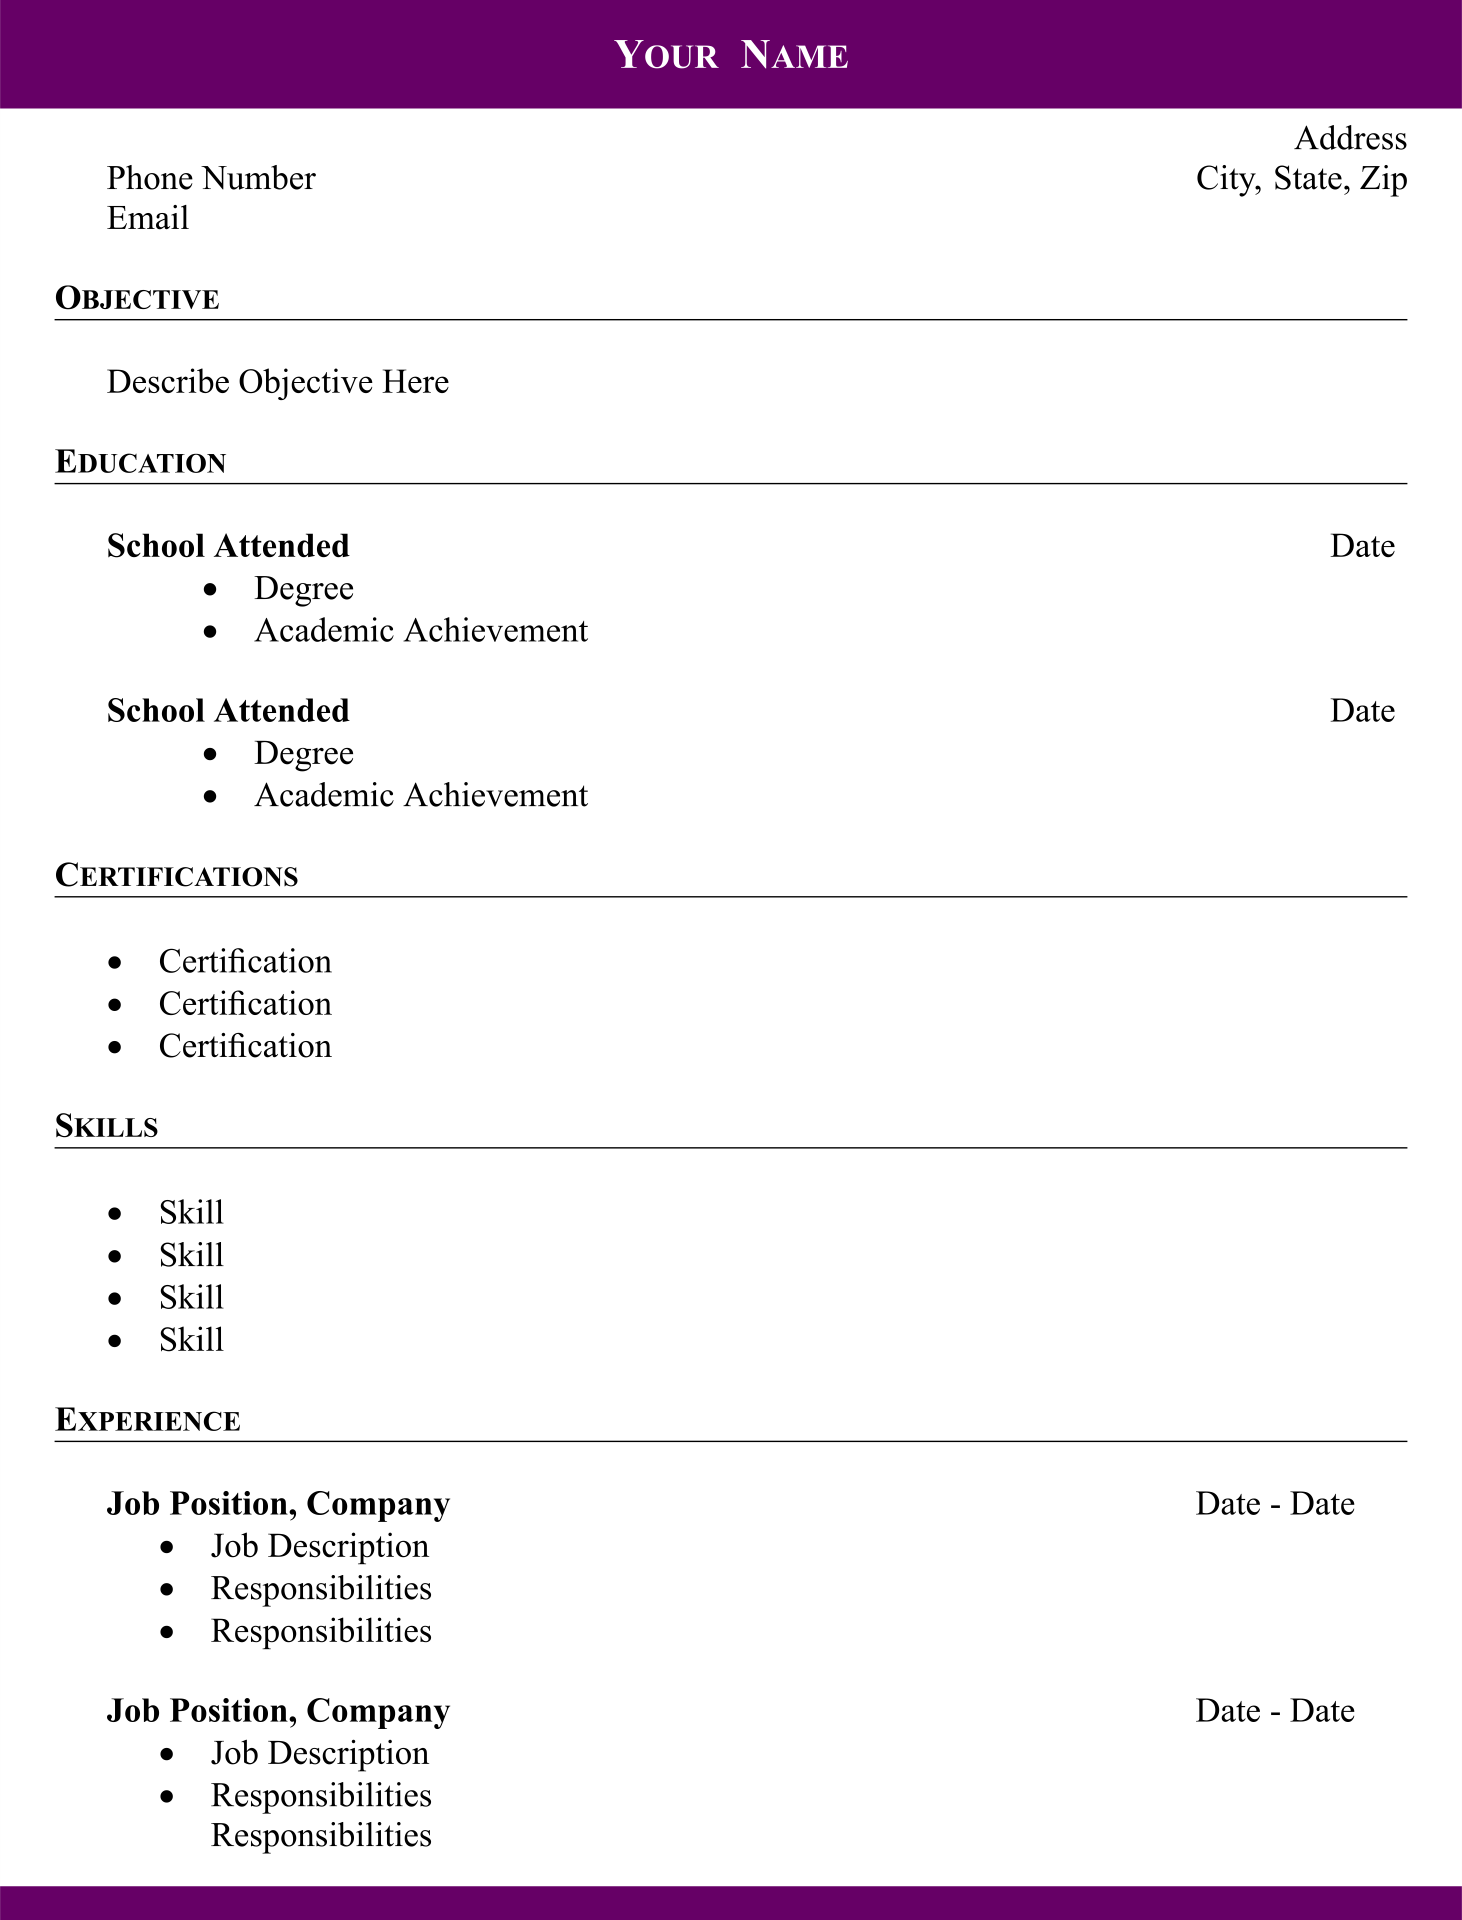 resume-free-template-with-photo-message